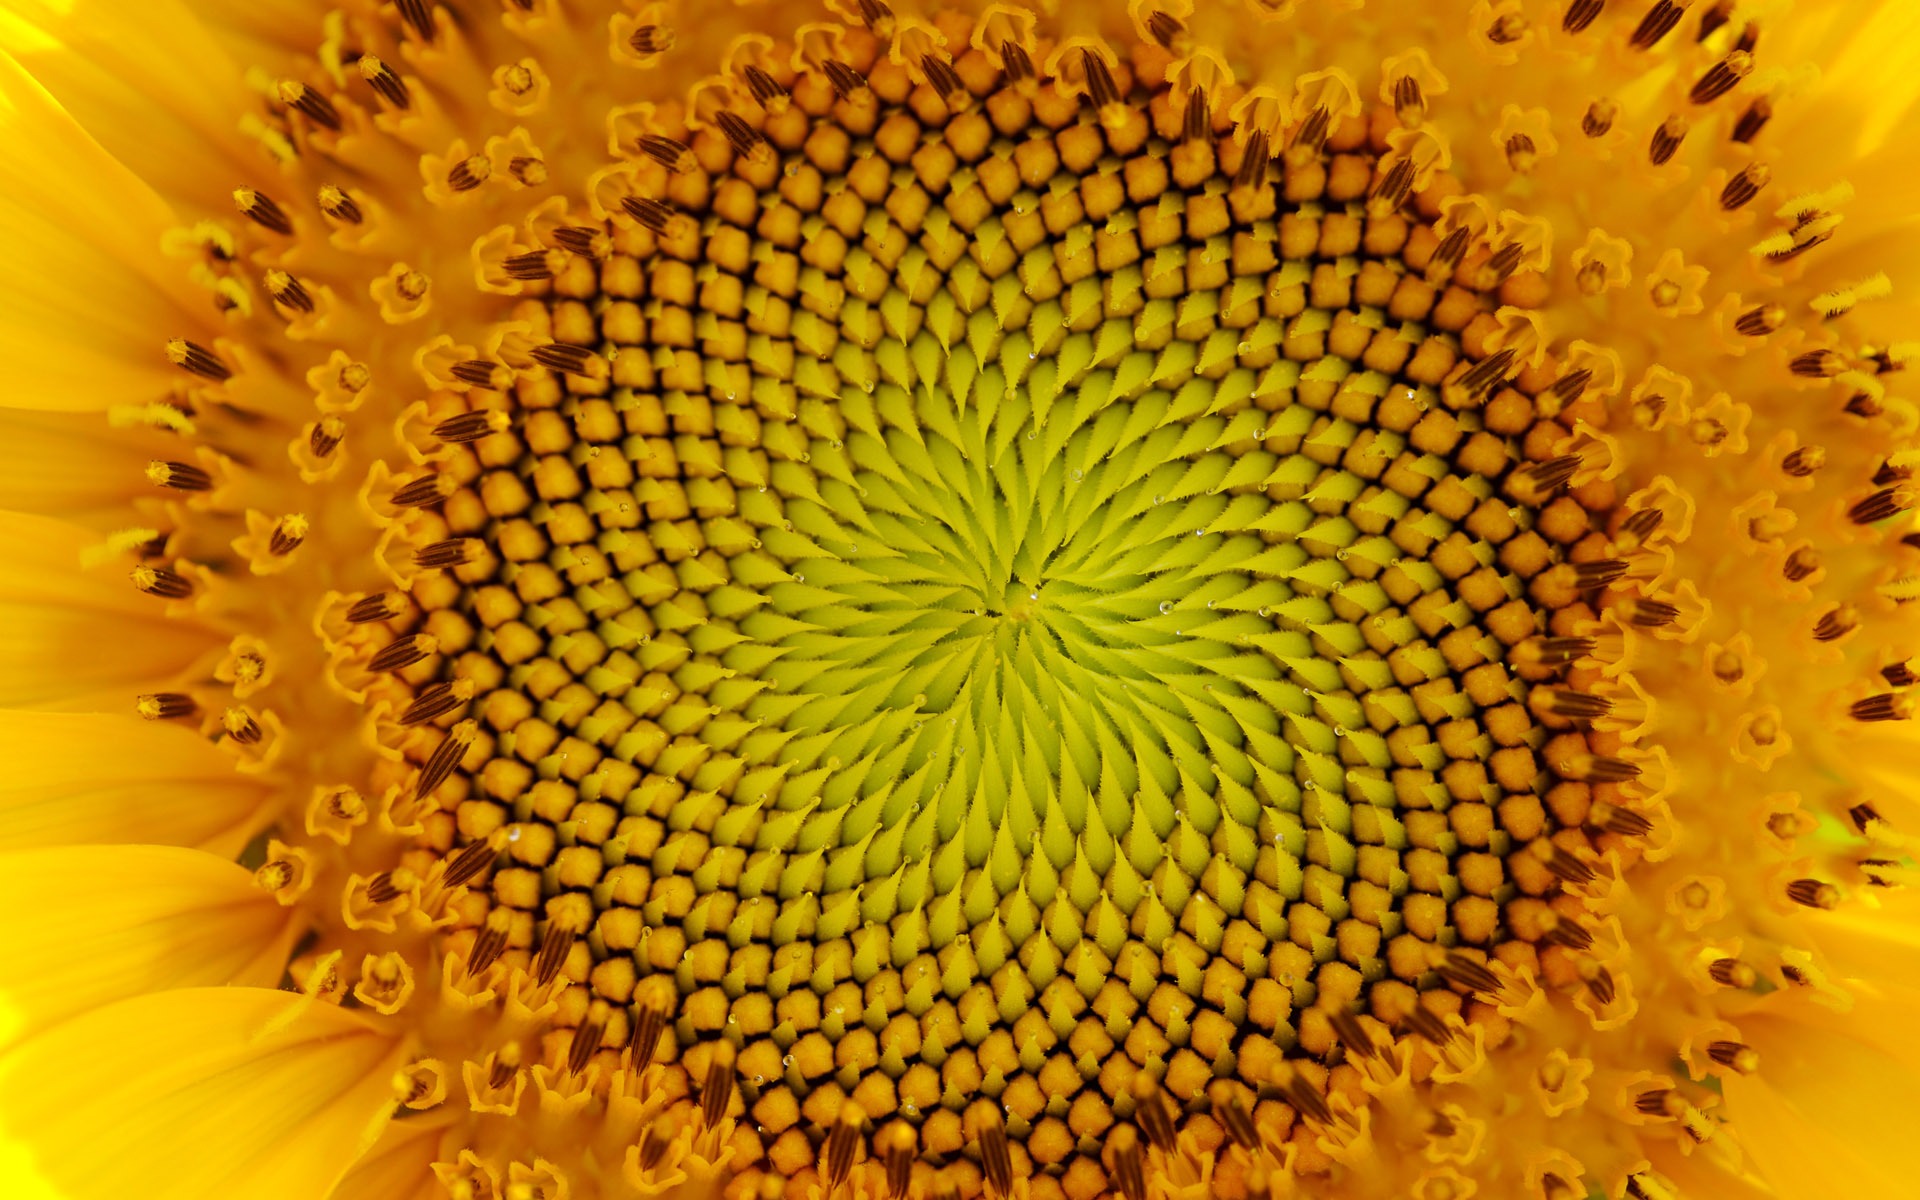 Sunny sunflower photo HD Wallpapers #30 - 1920x1200